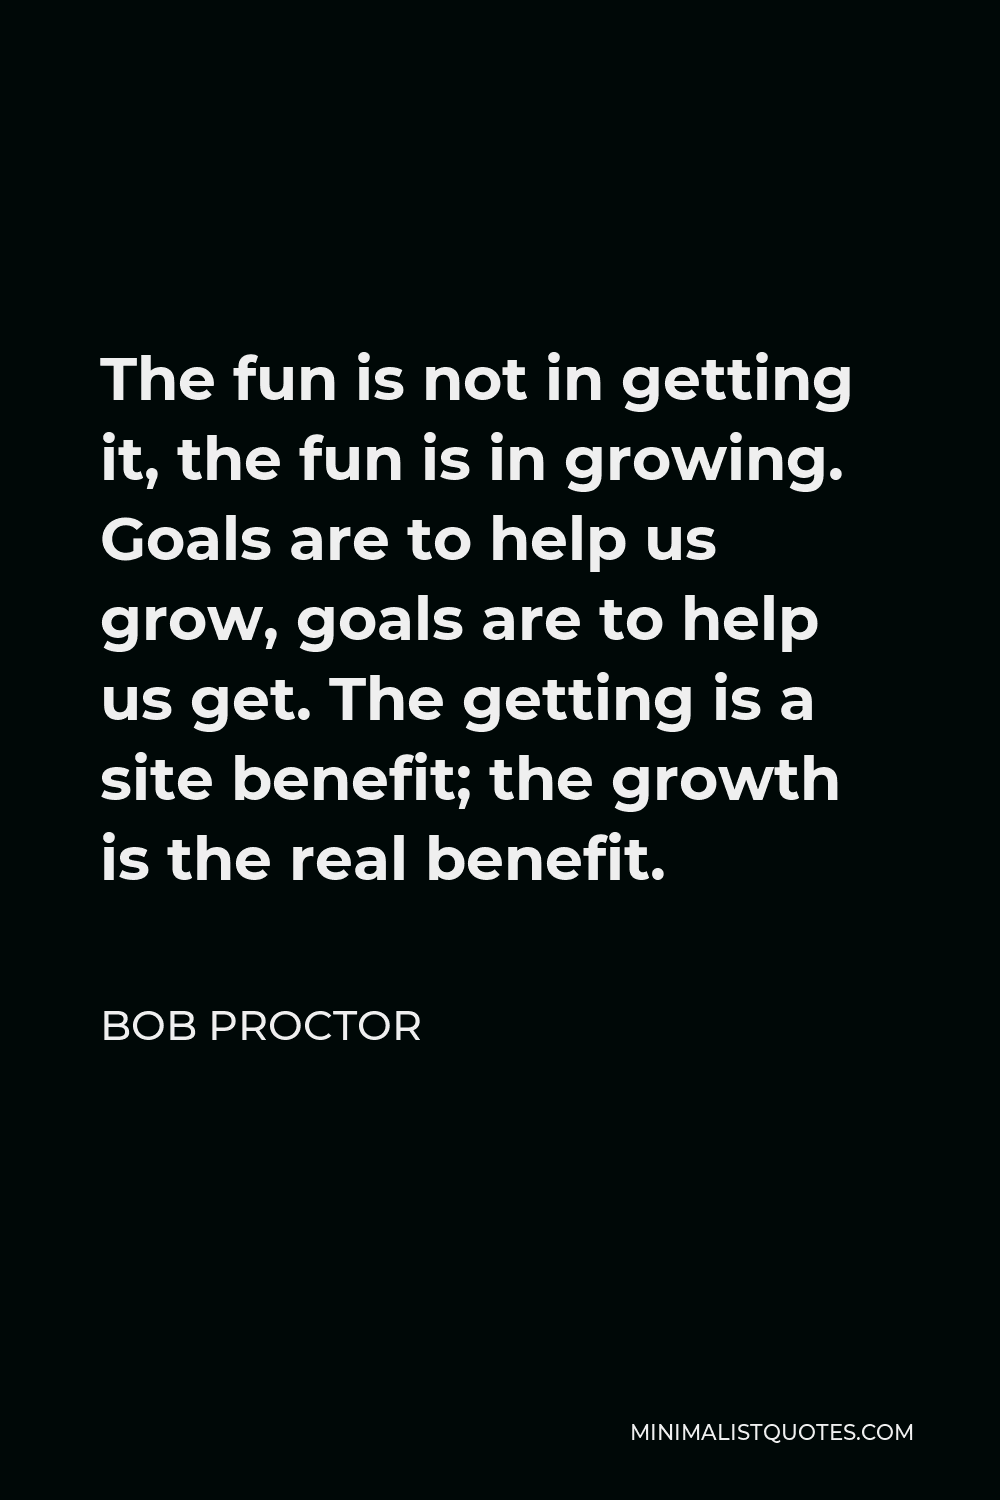 Bob Proctor Quote - The fun is not in getting it, the fun is in growing. Goals are to help us grow, goals are to help us get. The getting is a site benefit; the growth is the real benefit.